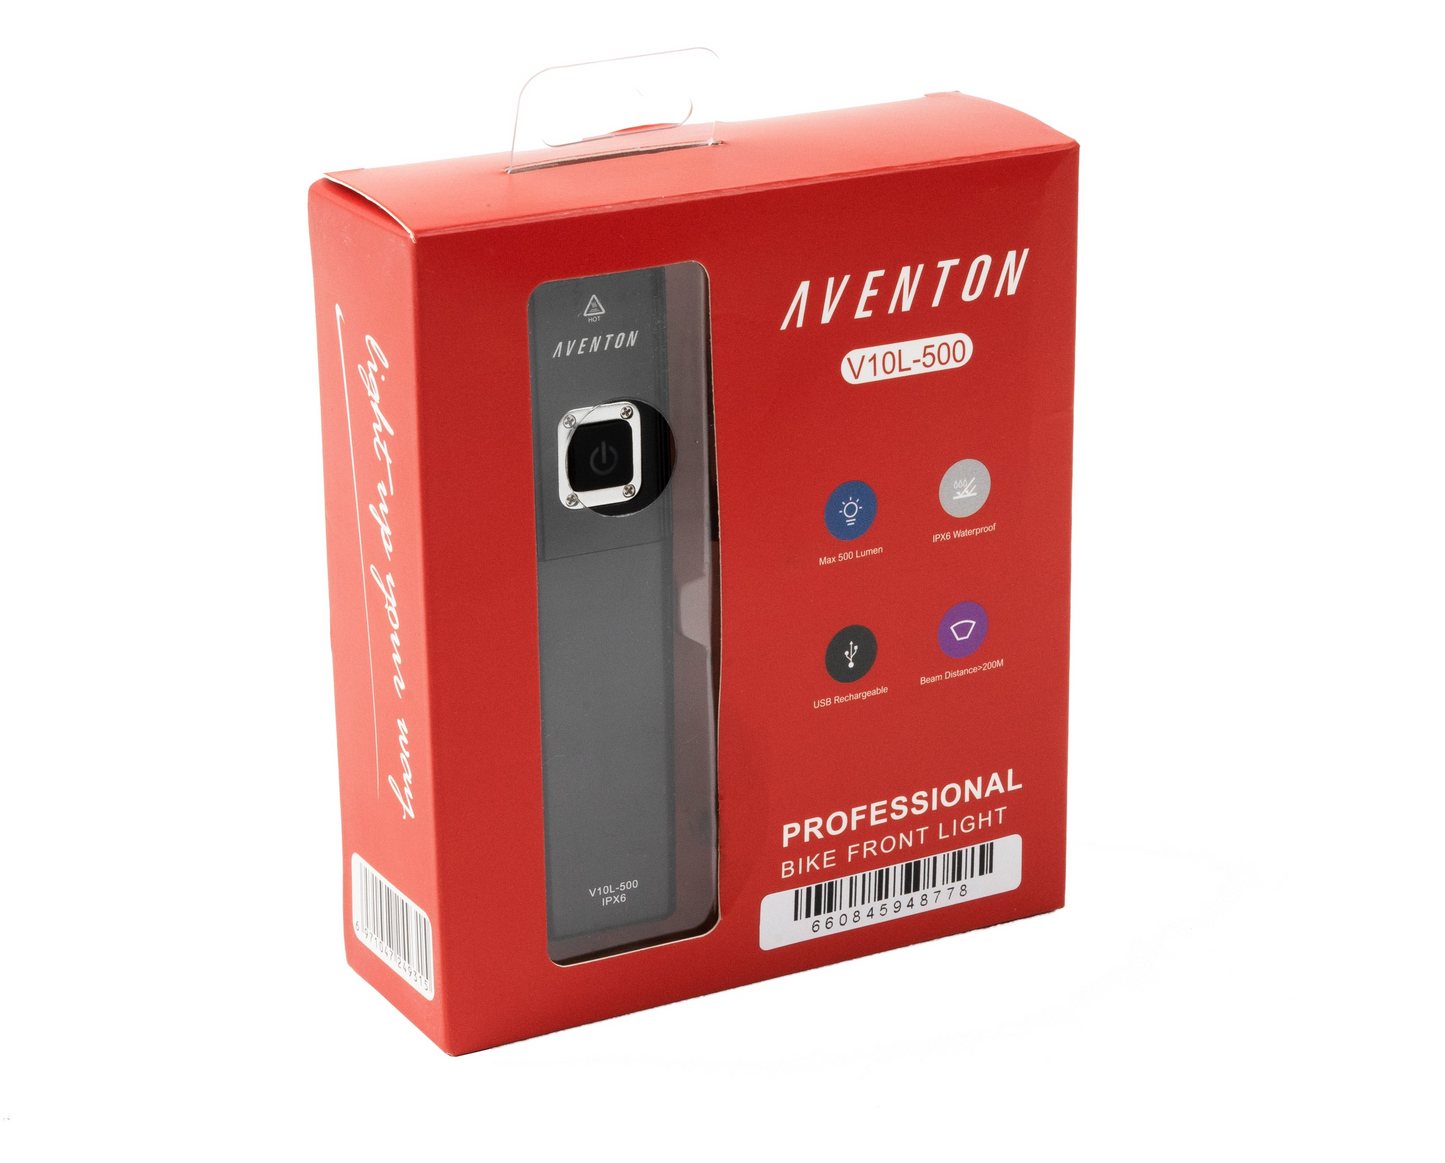 The Head Light - Aventon - V10-500 e-cig is packaged in a red box designed for safety in low-light conditions.